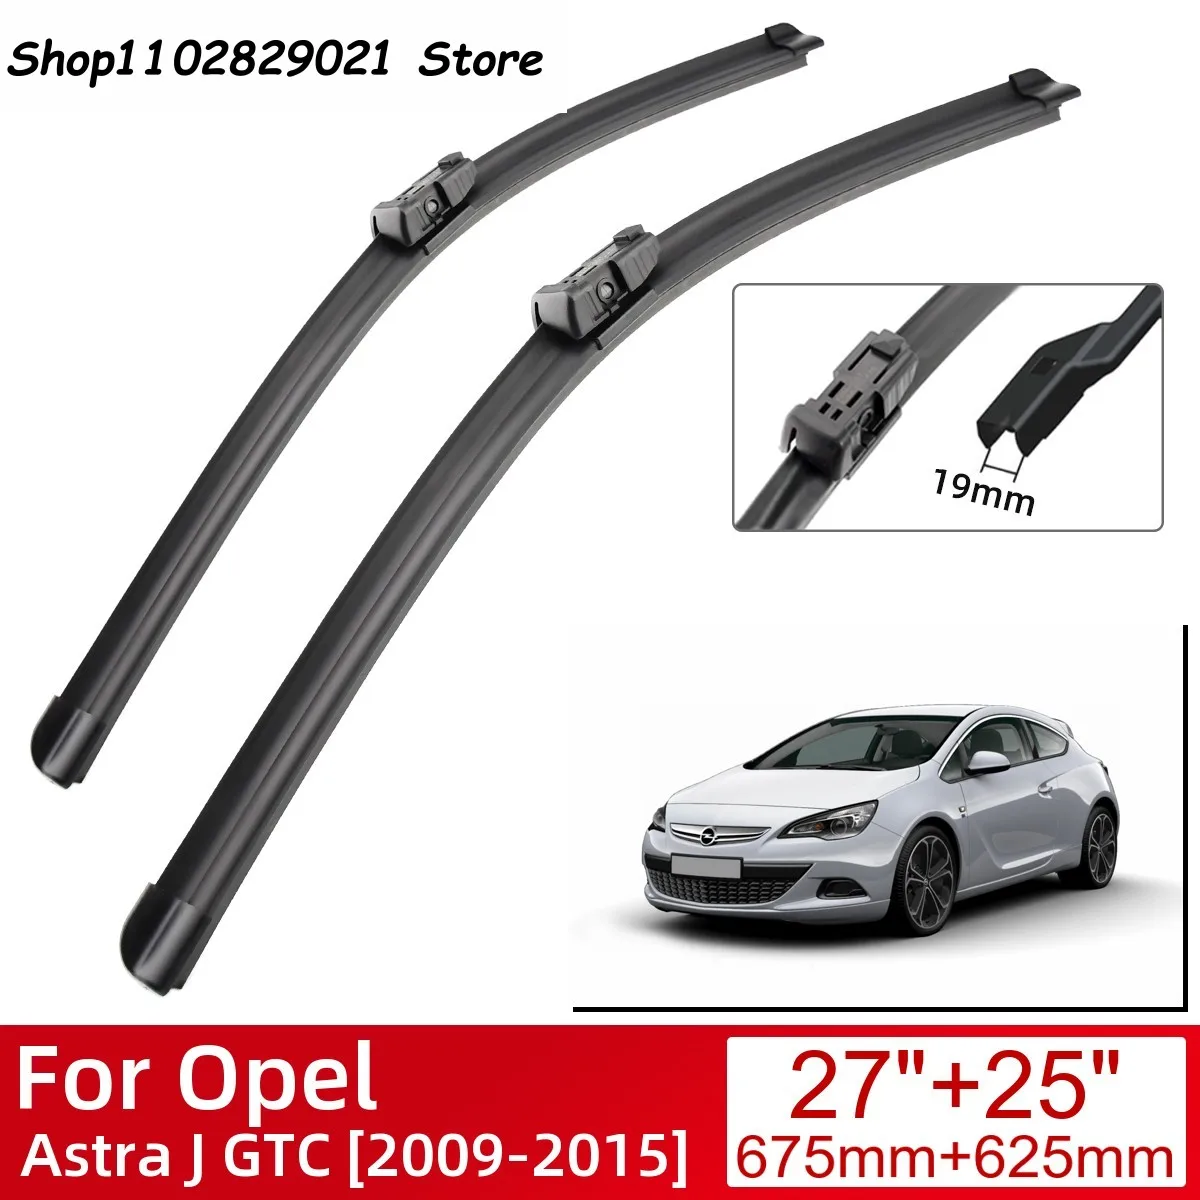 

For Opel Astra J GTC 2009-2015 Car Accessories Front Windscreen Wiper Blade Brushes Wipers 2015 2014 2013 2012 2011 2010 2009